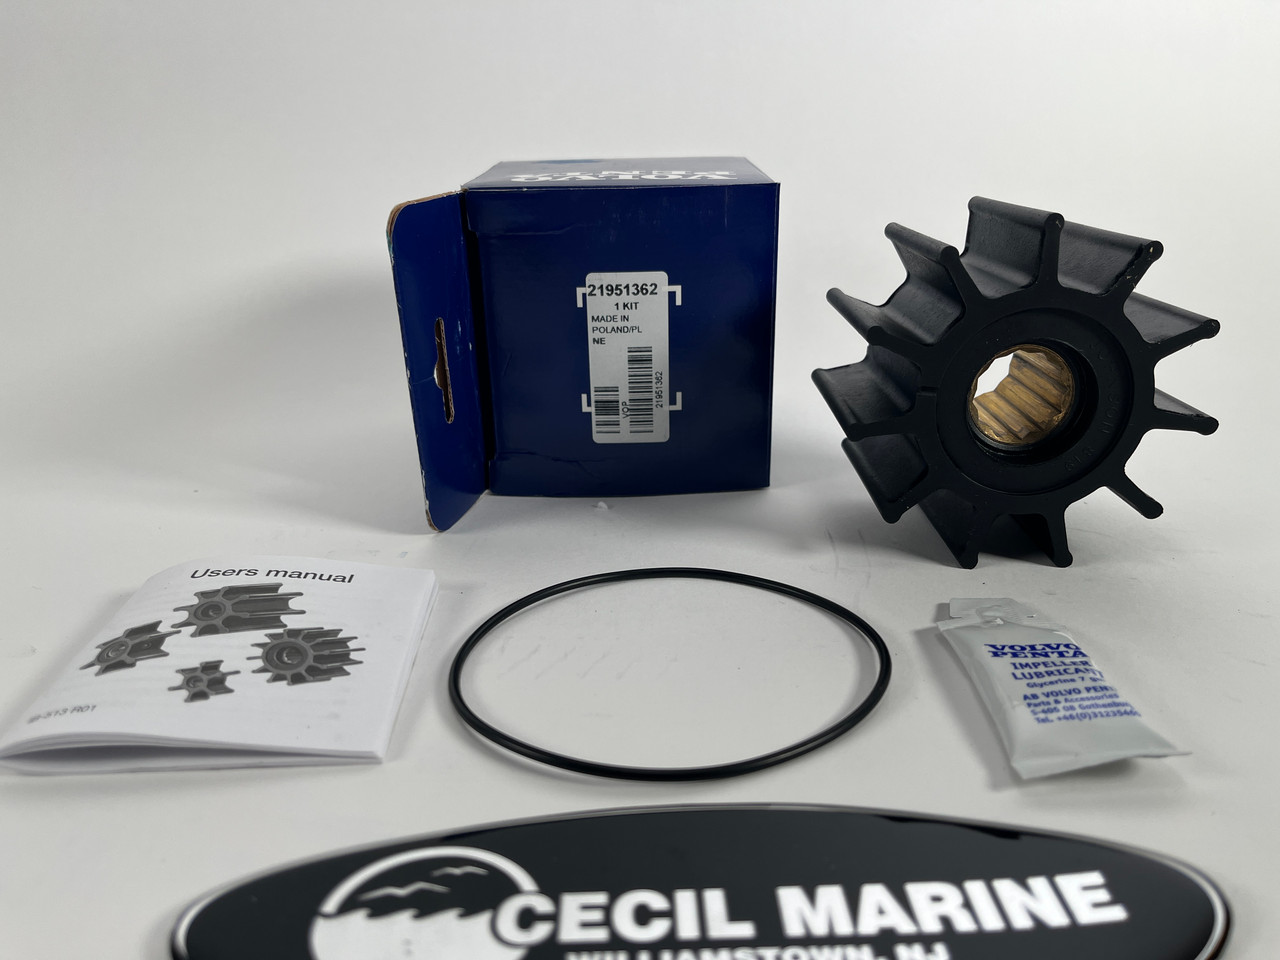 $99.99* GENUINE VOLVO no tax* IMPELLER KIT 21951362 *In Stock & Ready To Ship!